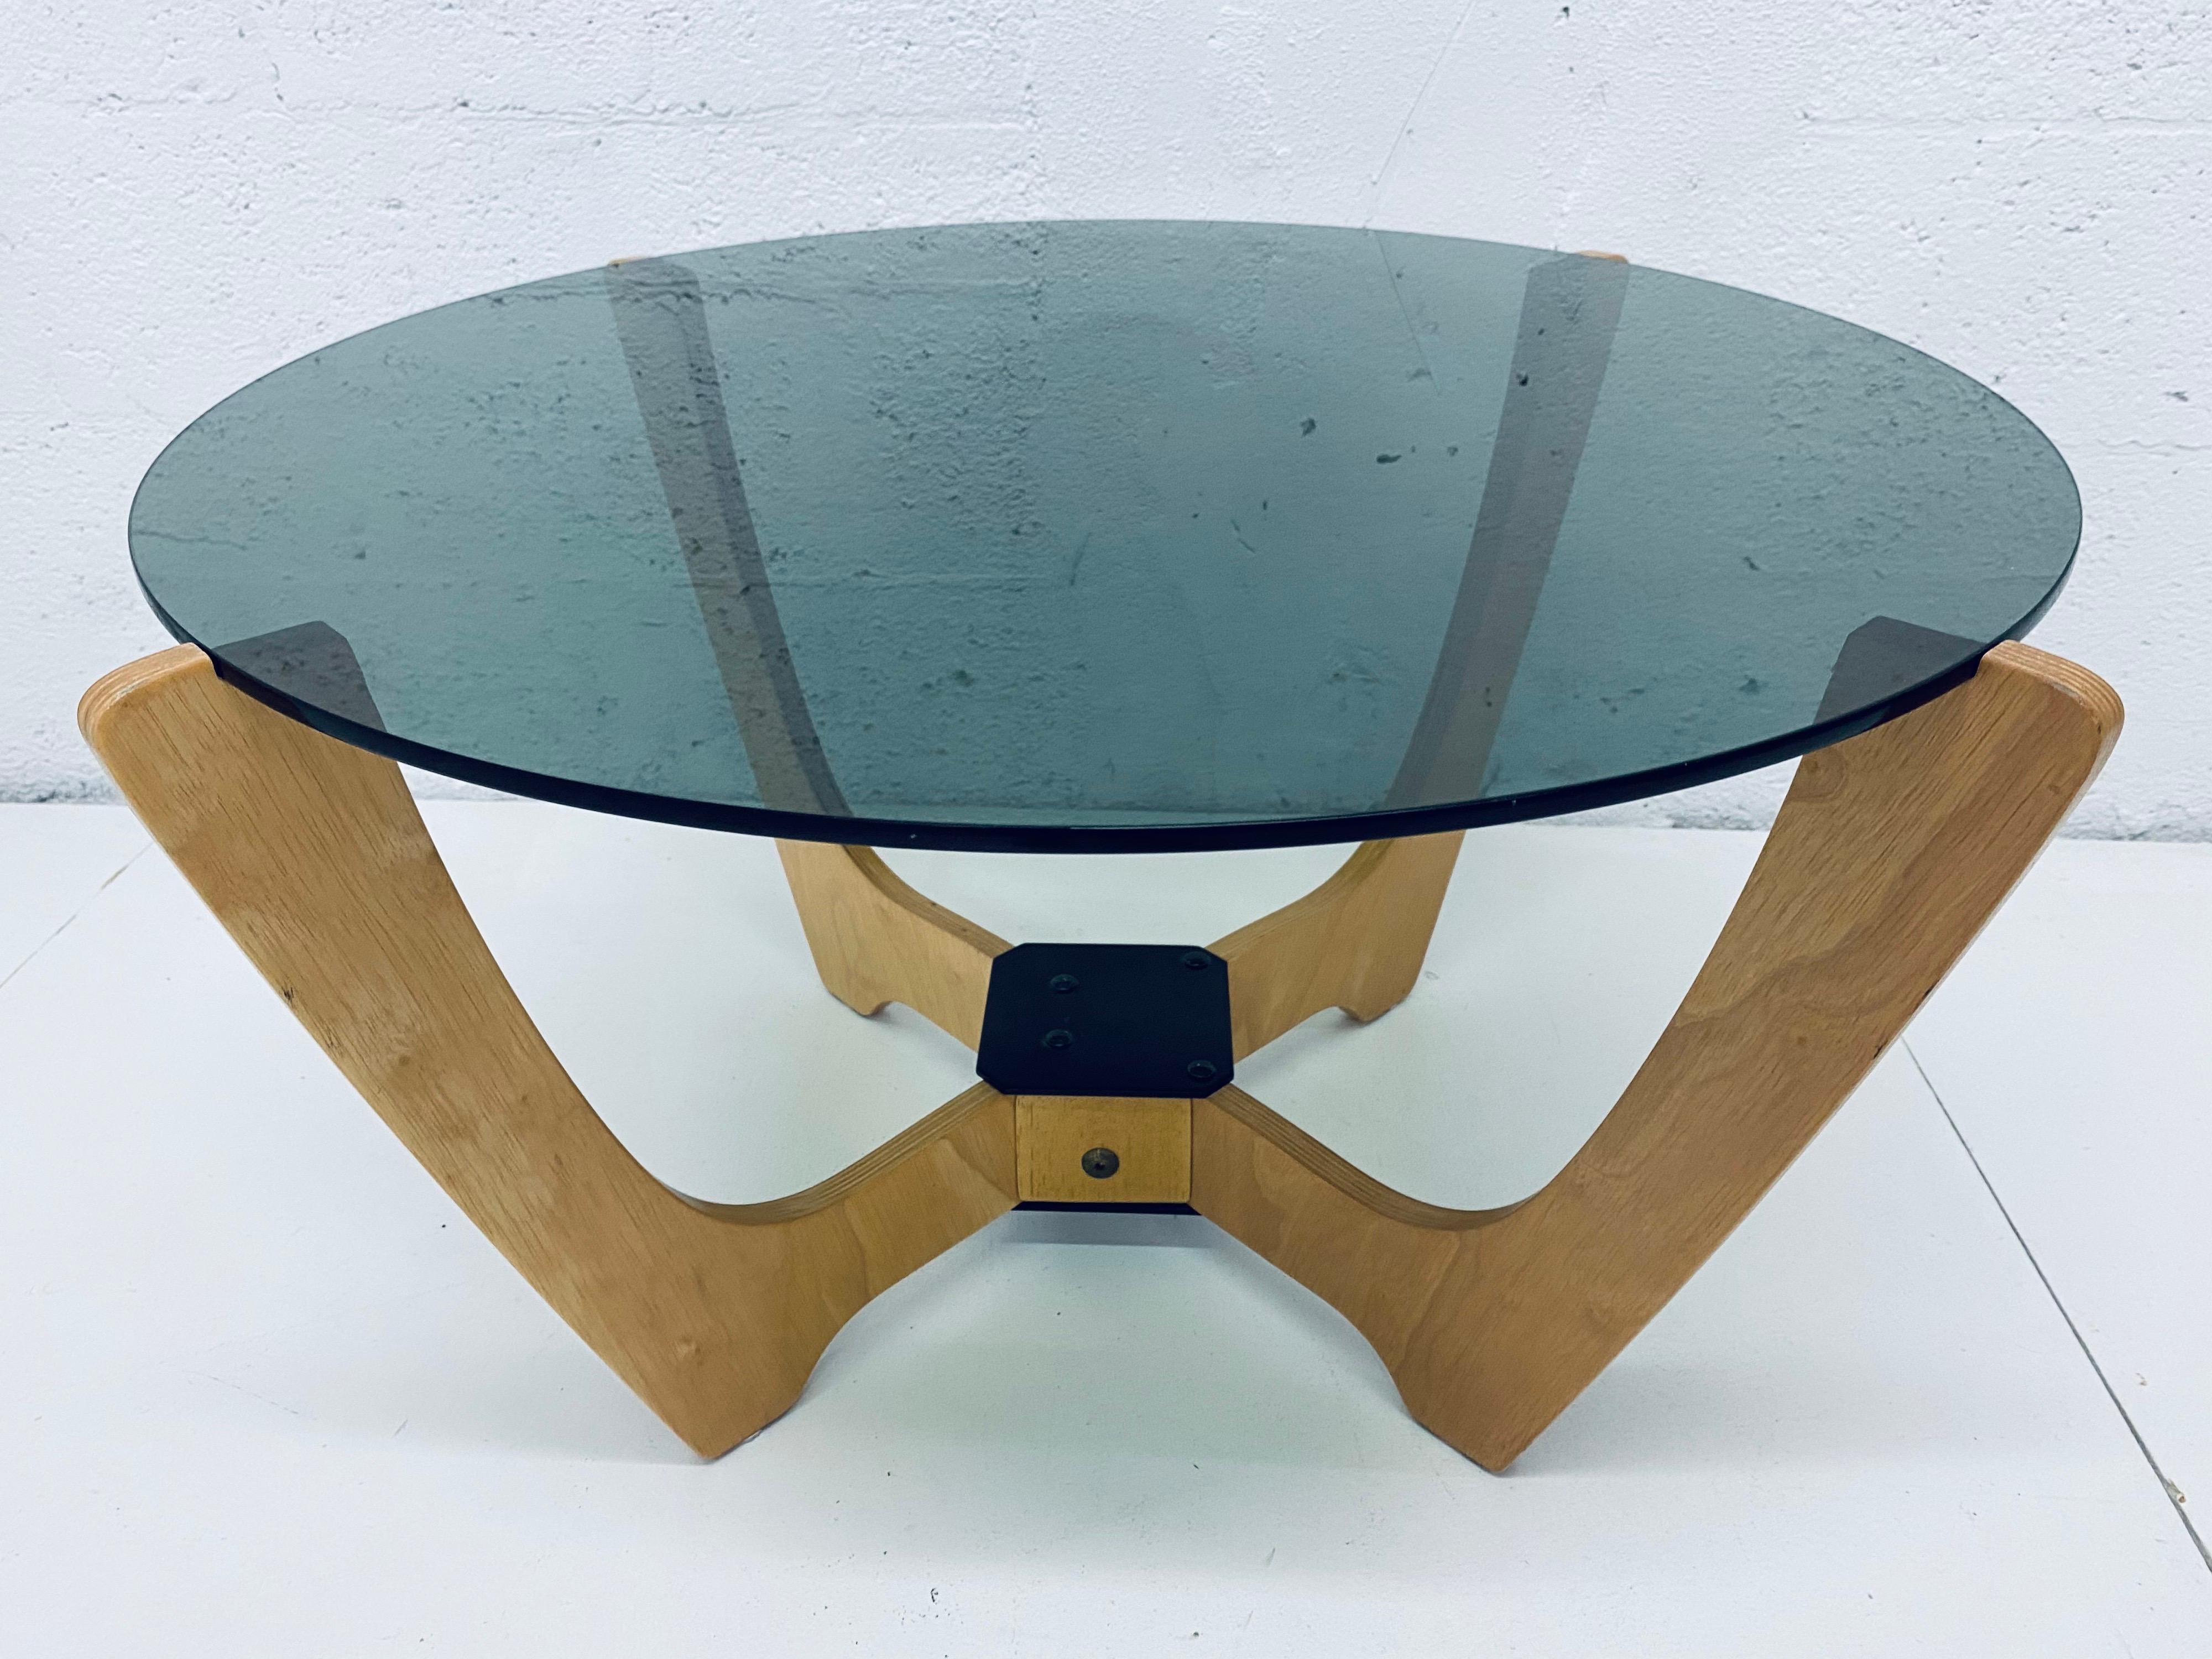 Odd Knutsen Midcentury Danish Modern Beech Wood and Glass Top Coffee Table In Good Condition For Sale In Miami, FL